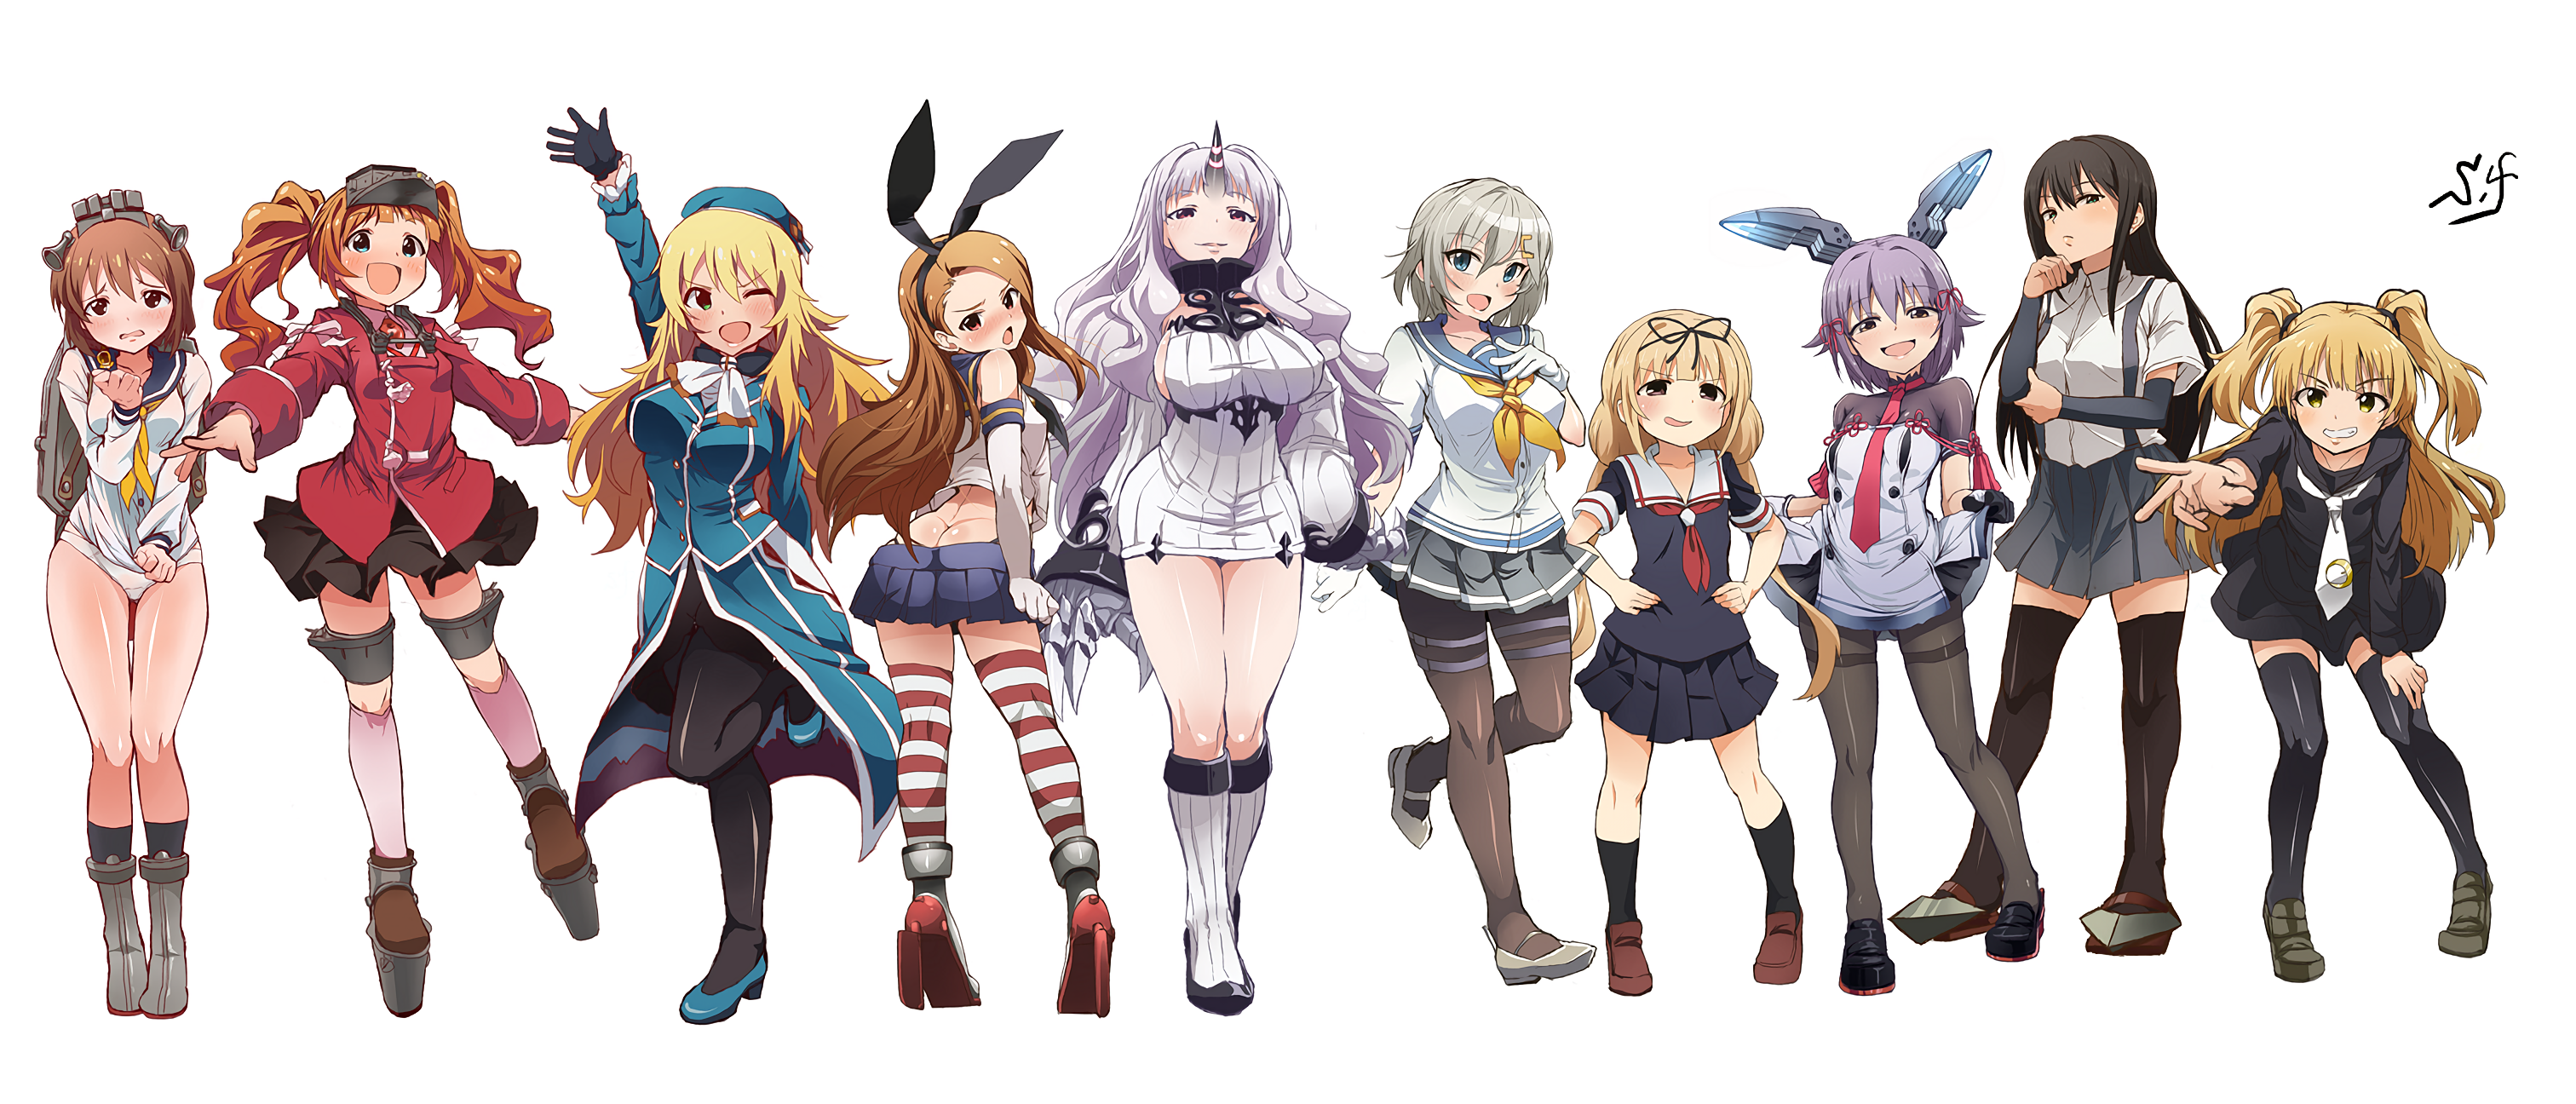 THE IDOLM STER Kantai Collection Artwork Parody Anime Girls Brunette Blonde Blond Hair Redhead Silve 3024x1296